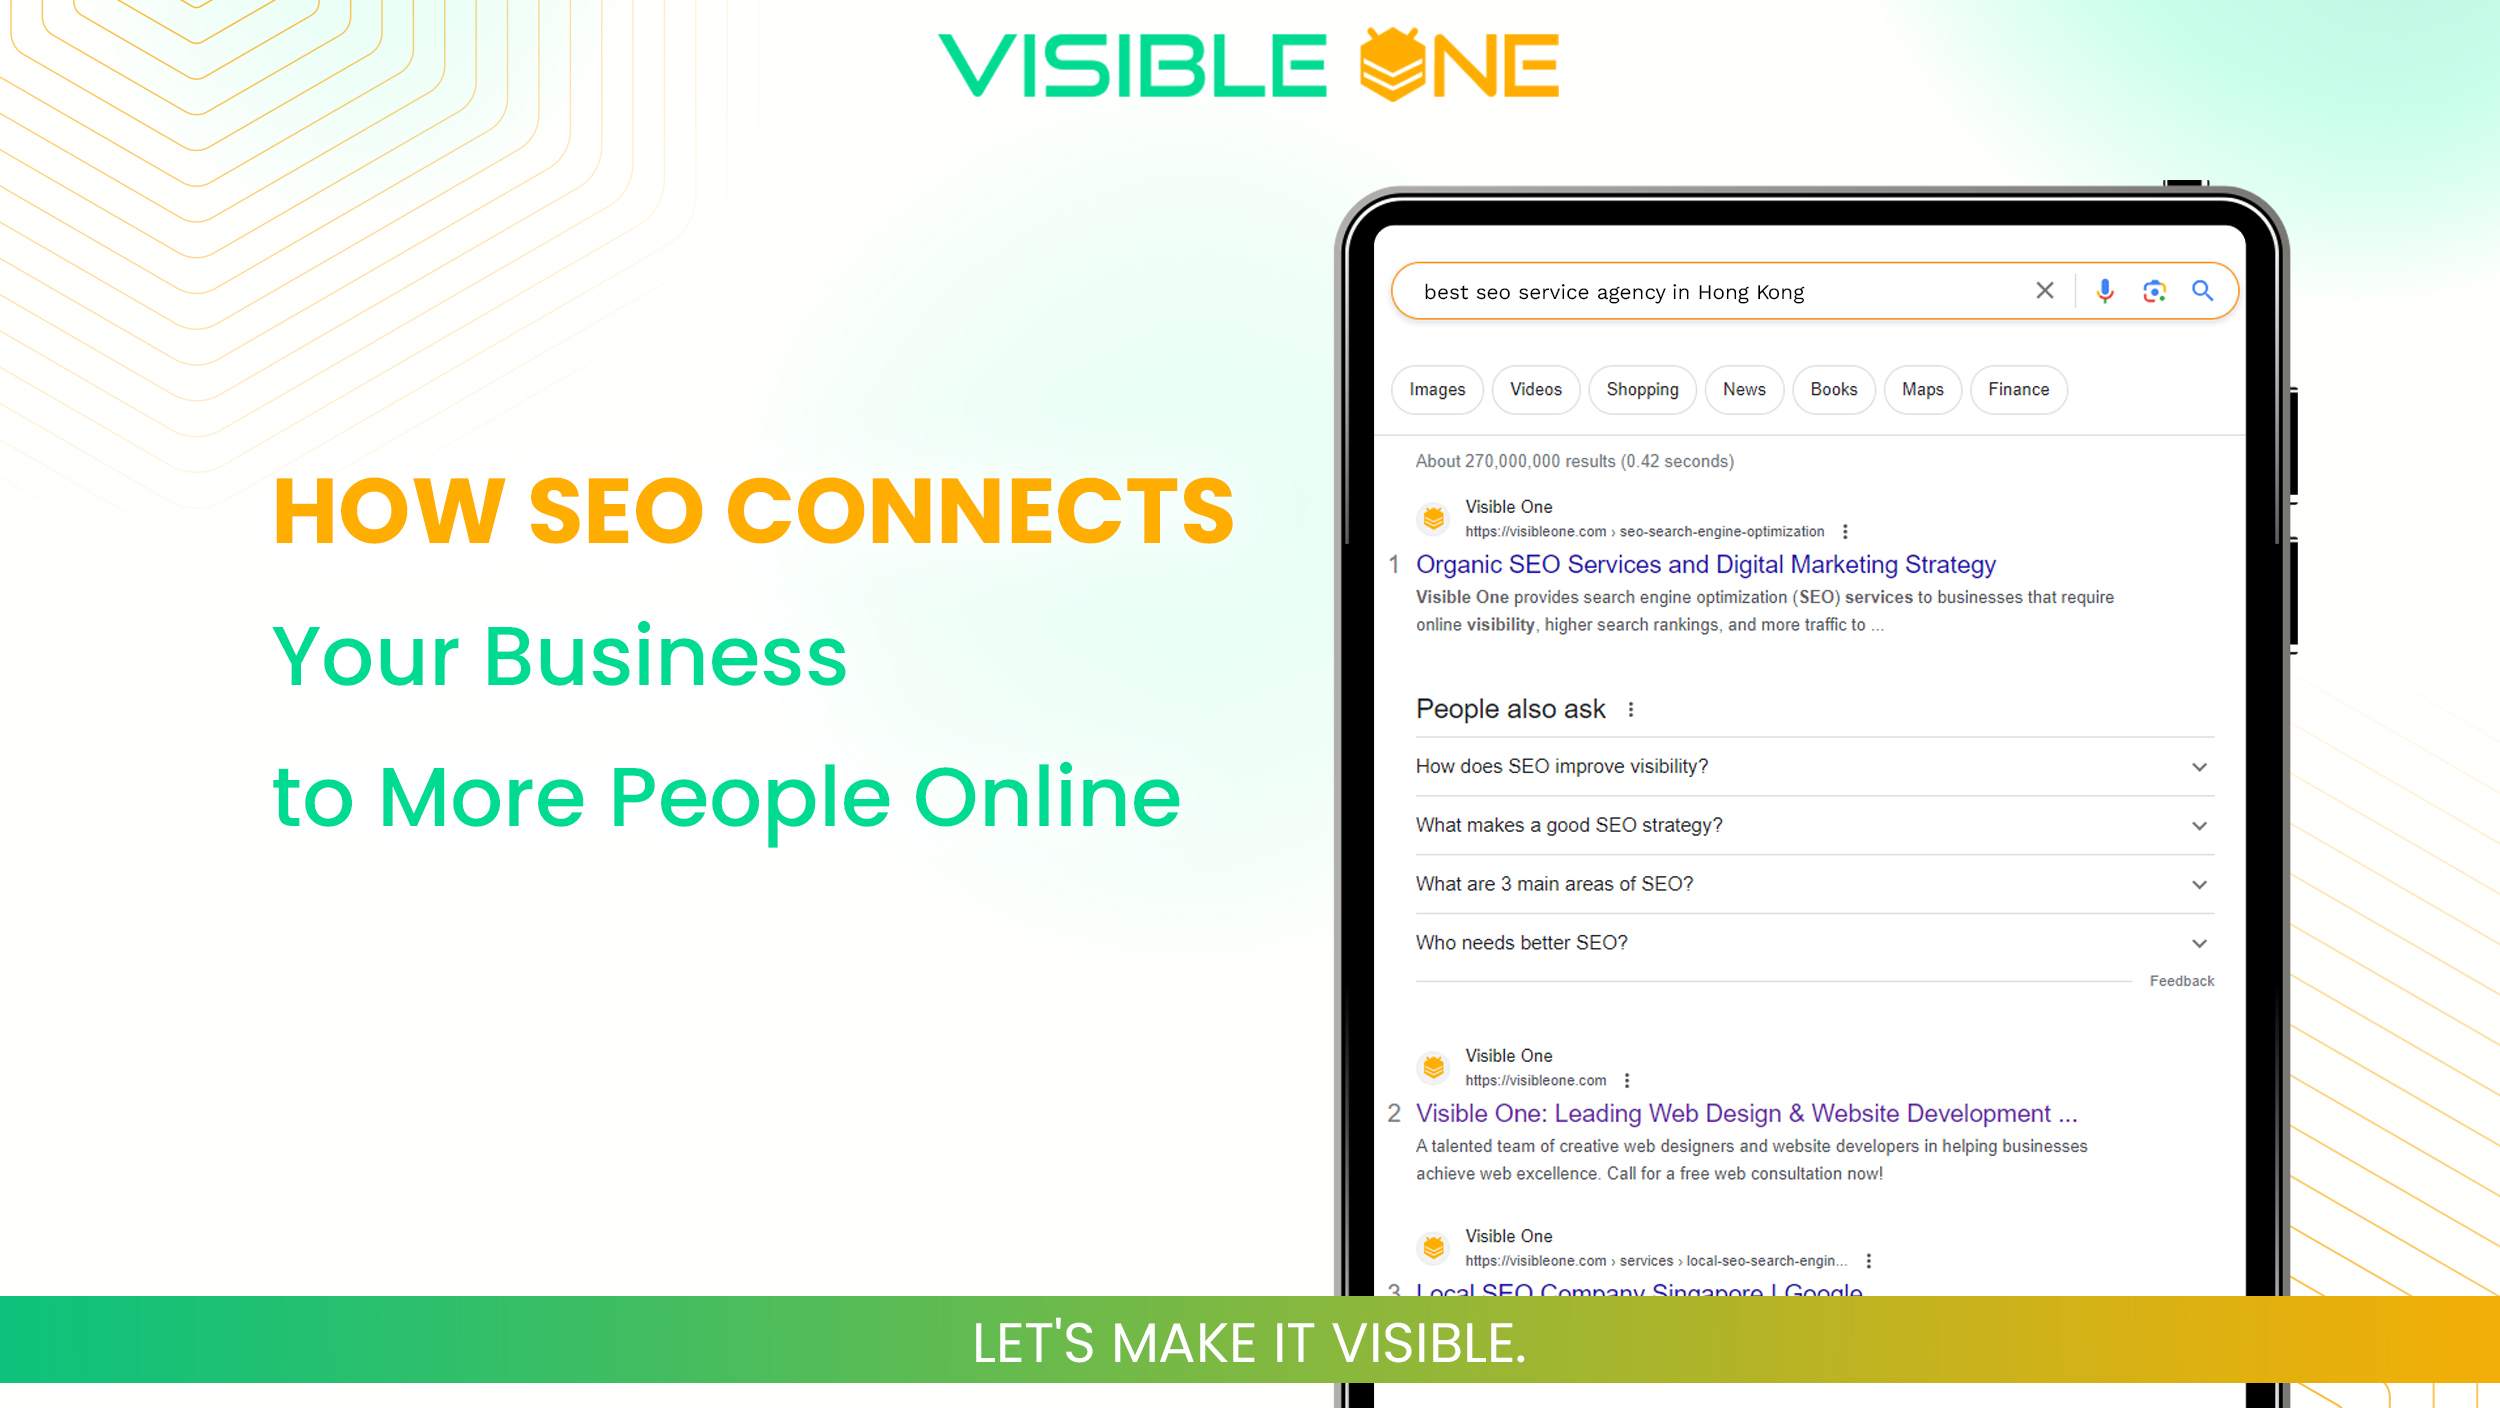 How SEO Connects Your Business to More People Online